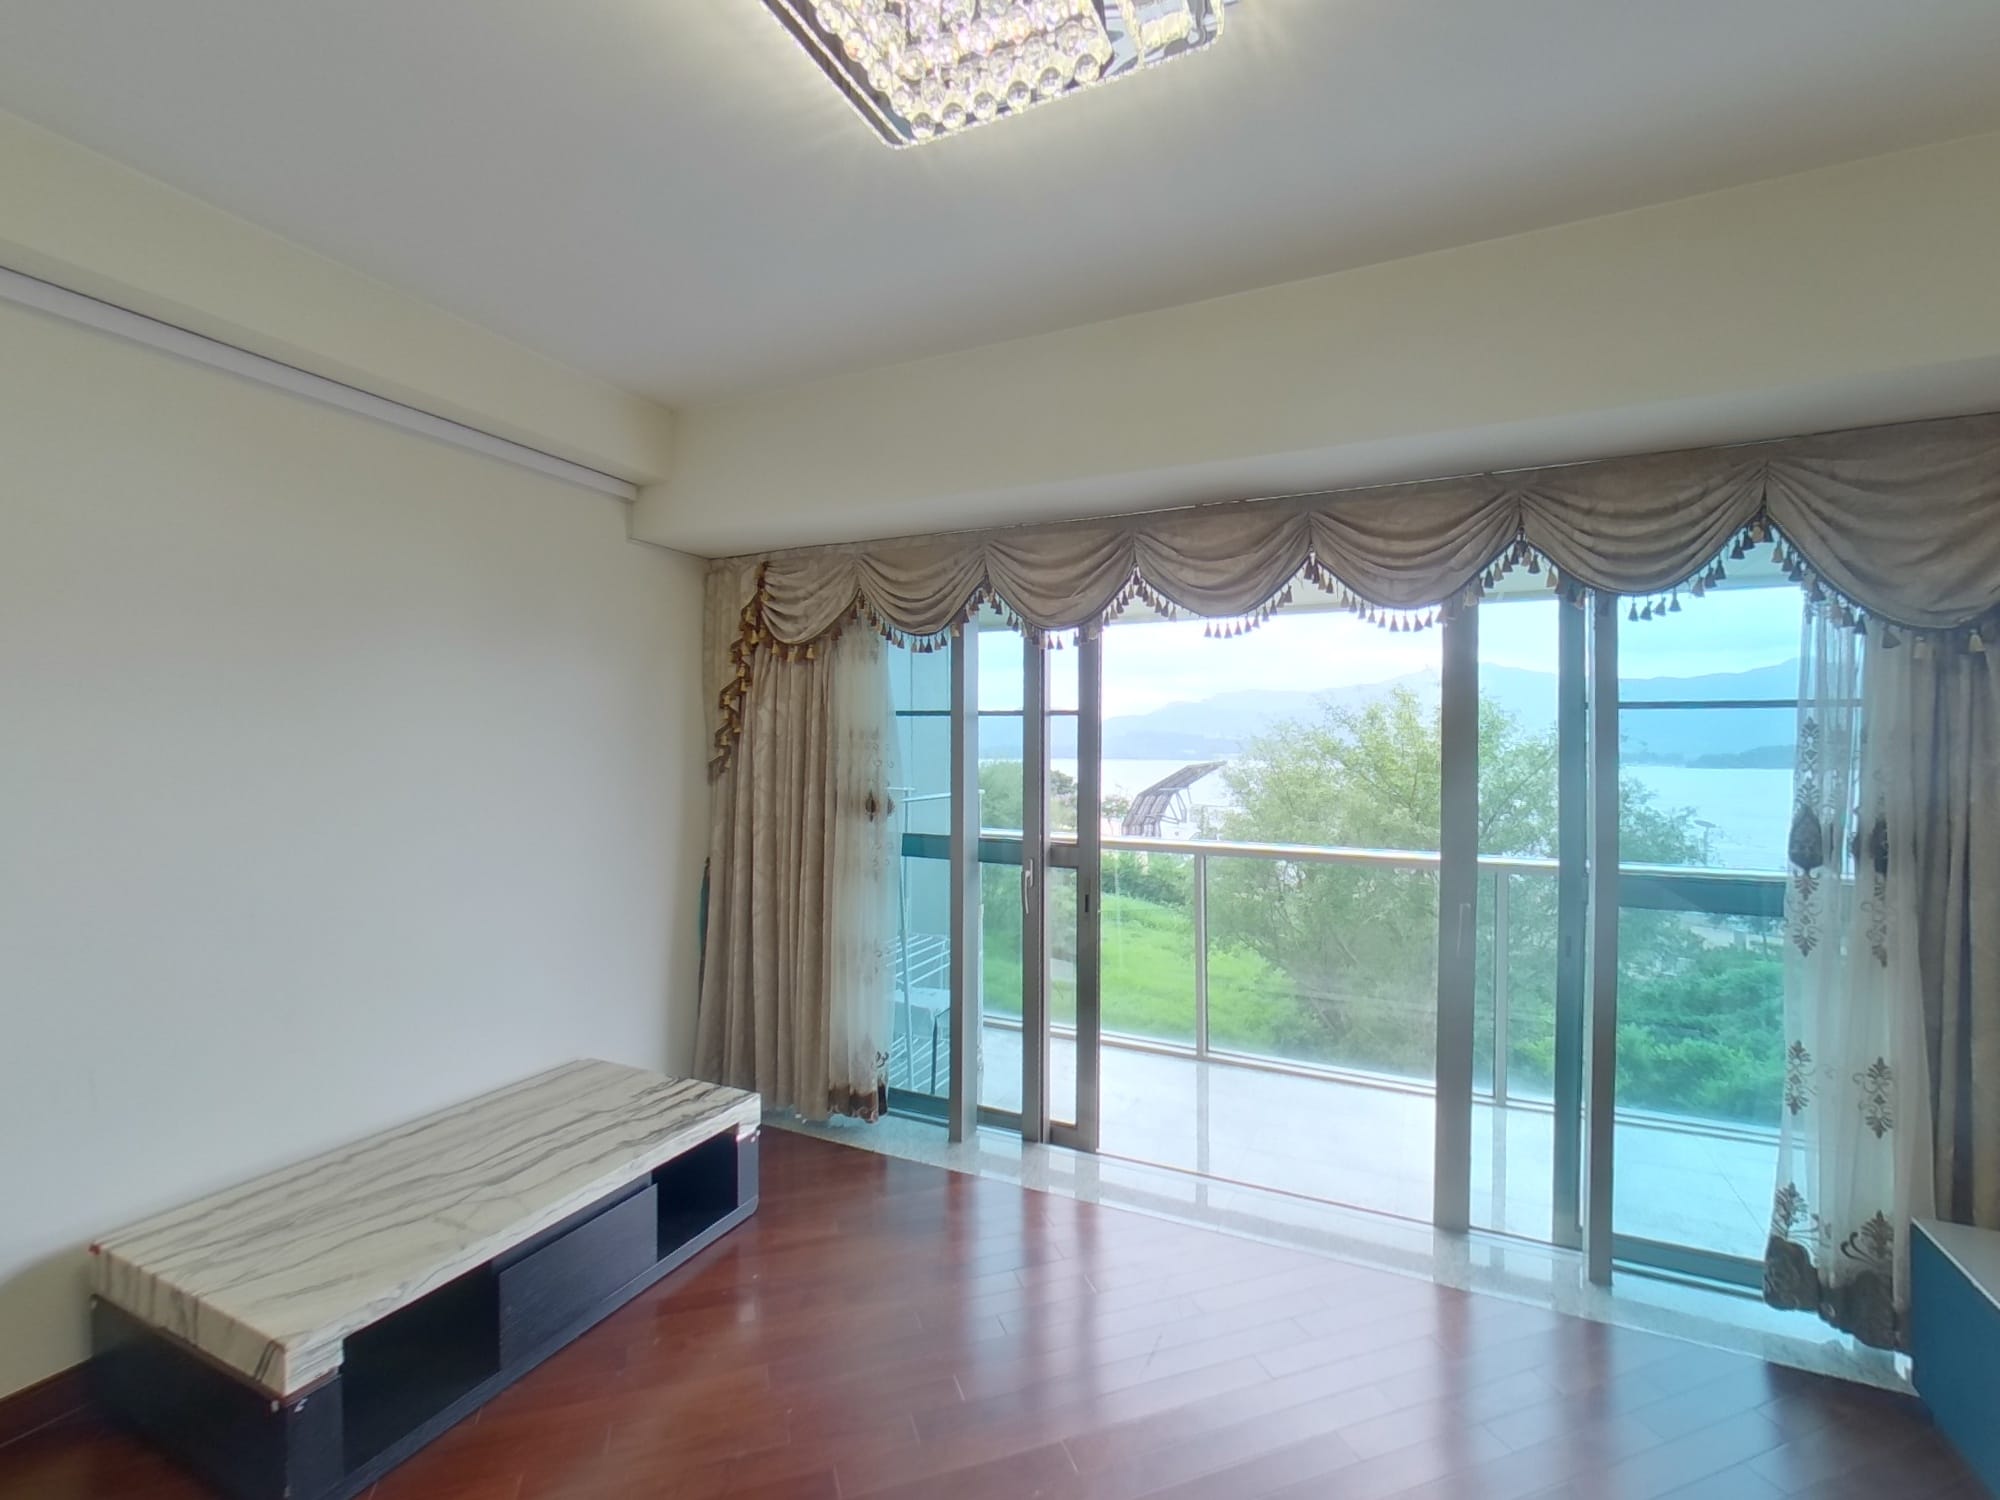 MAYFAIR BY THE SEA II TWR 06 Tai Po 1505304 For Buy